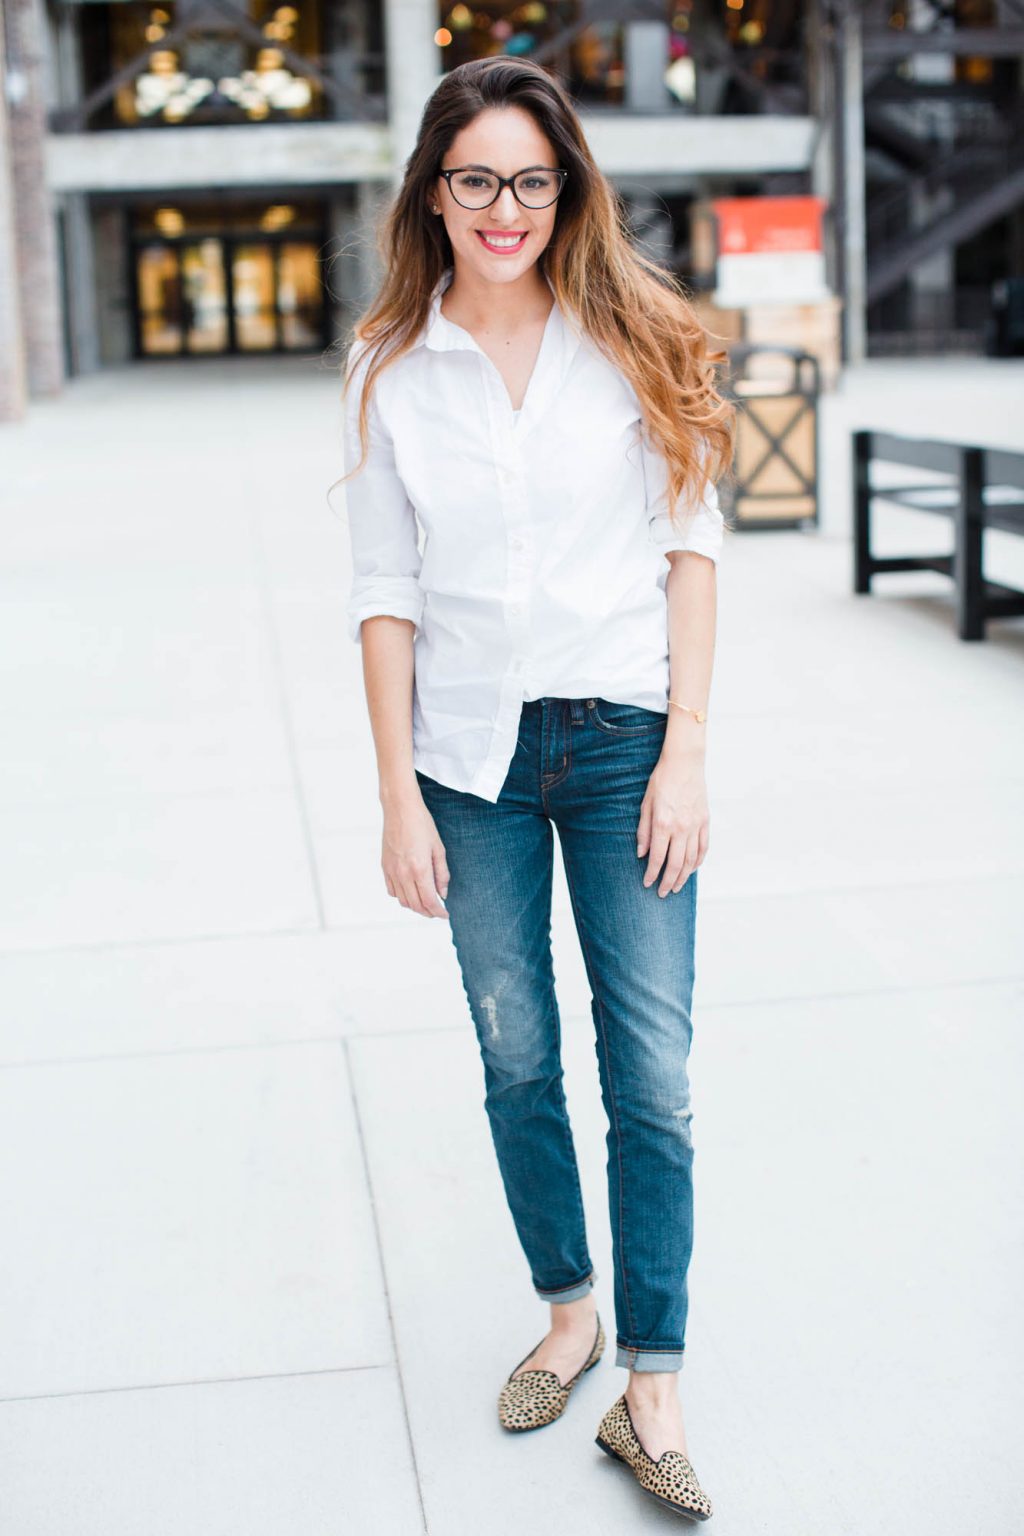 jcrew event atlanta, jcrew ponce city market, fall basics, white button down and jeans, casual chic, classic style, summer to fall transition outfit ideas